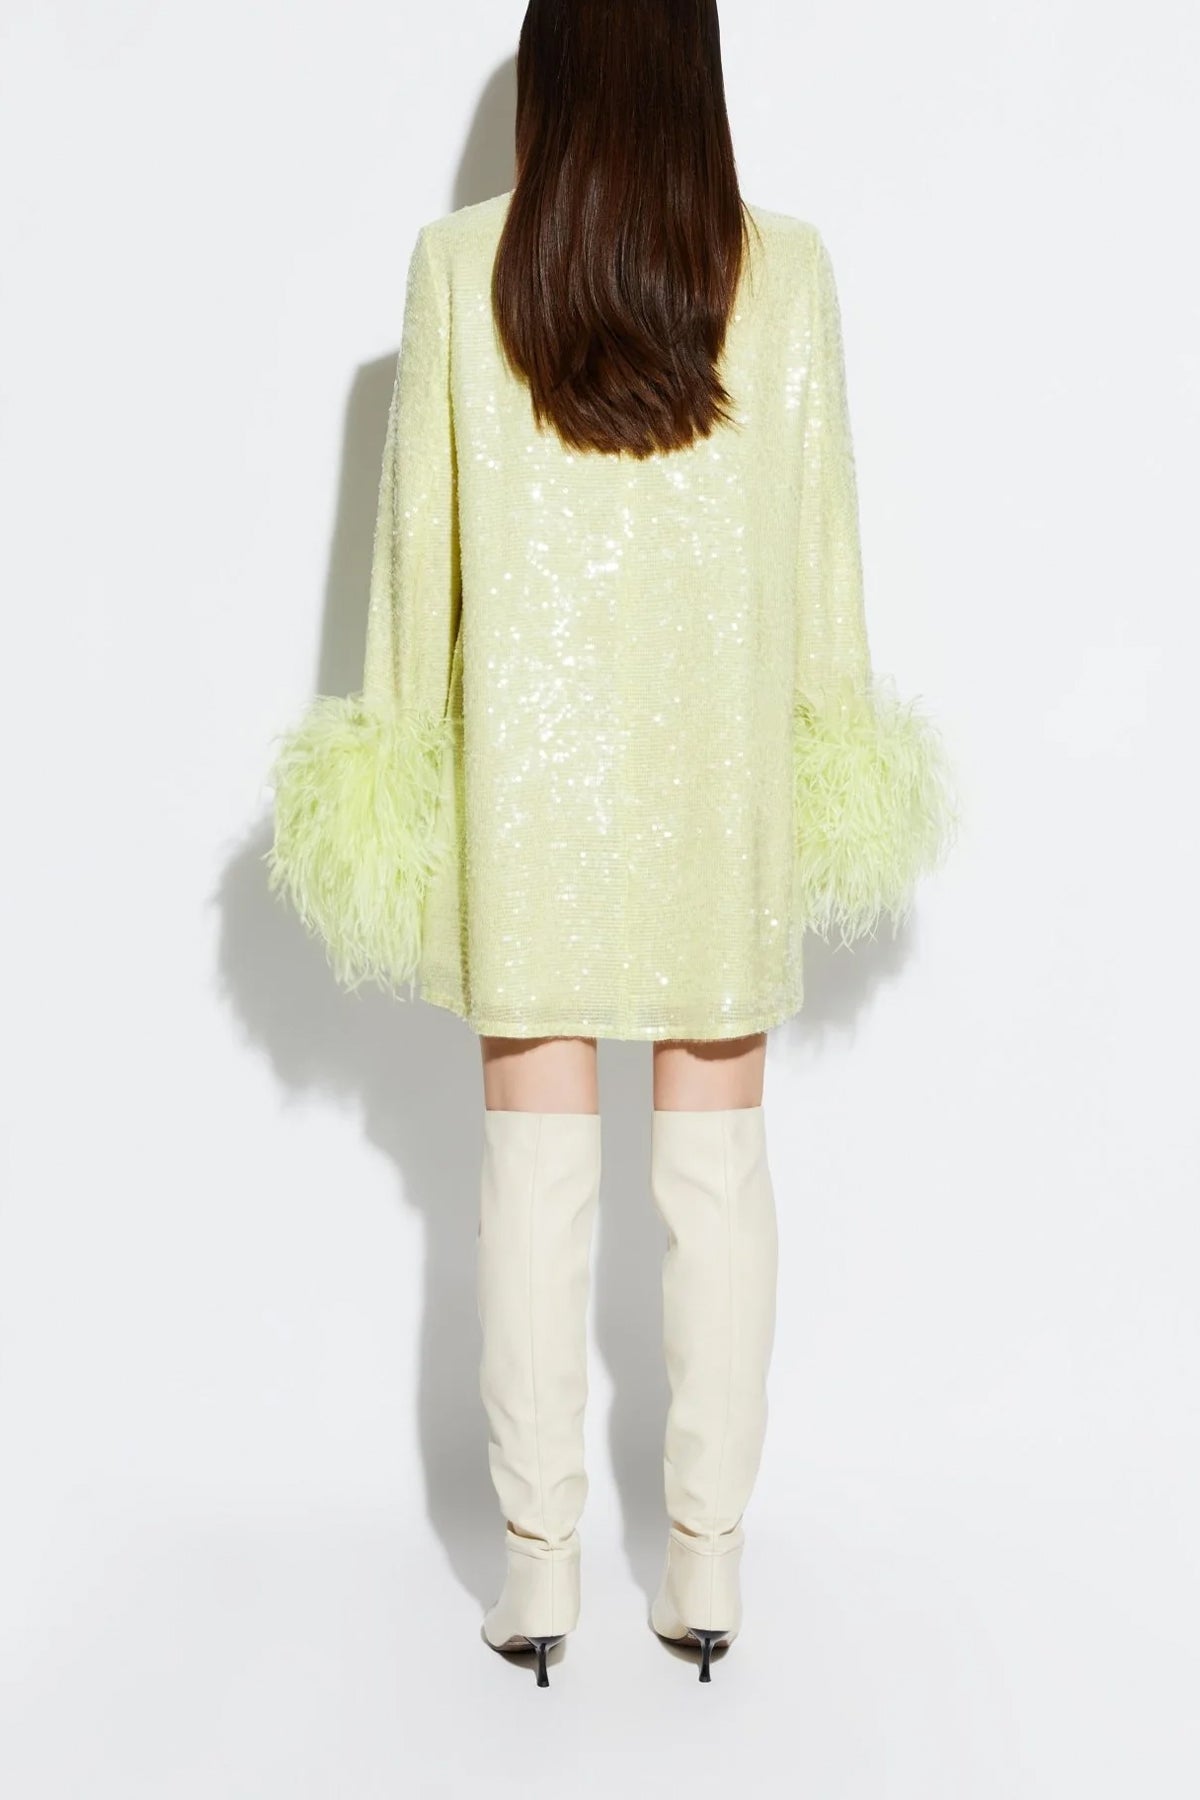 Sequin Dress with Feathers in Limon - shop-olivia.com